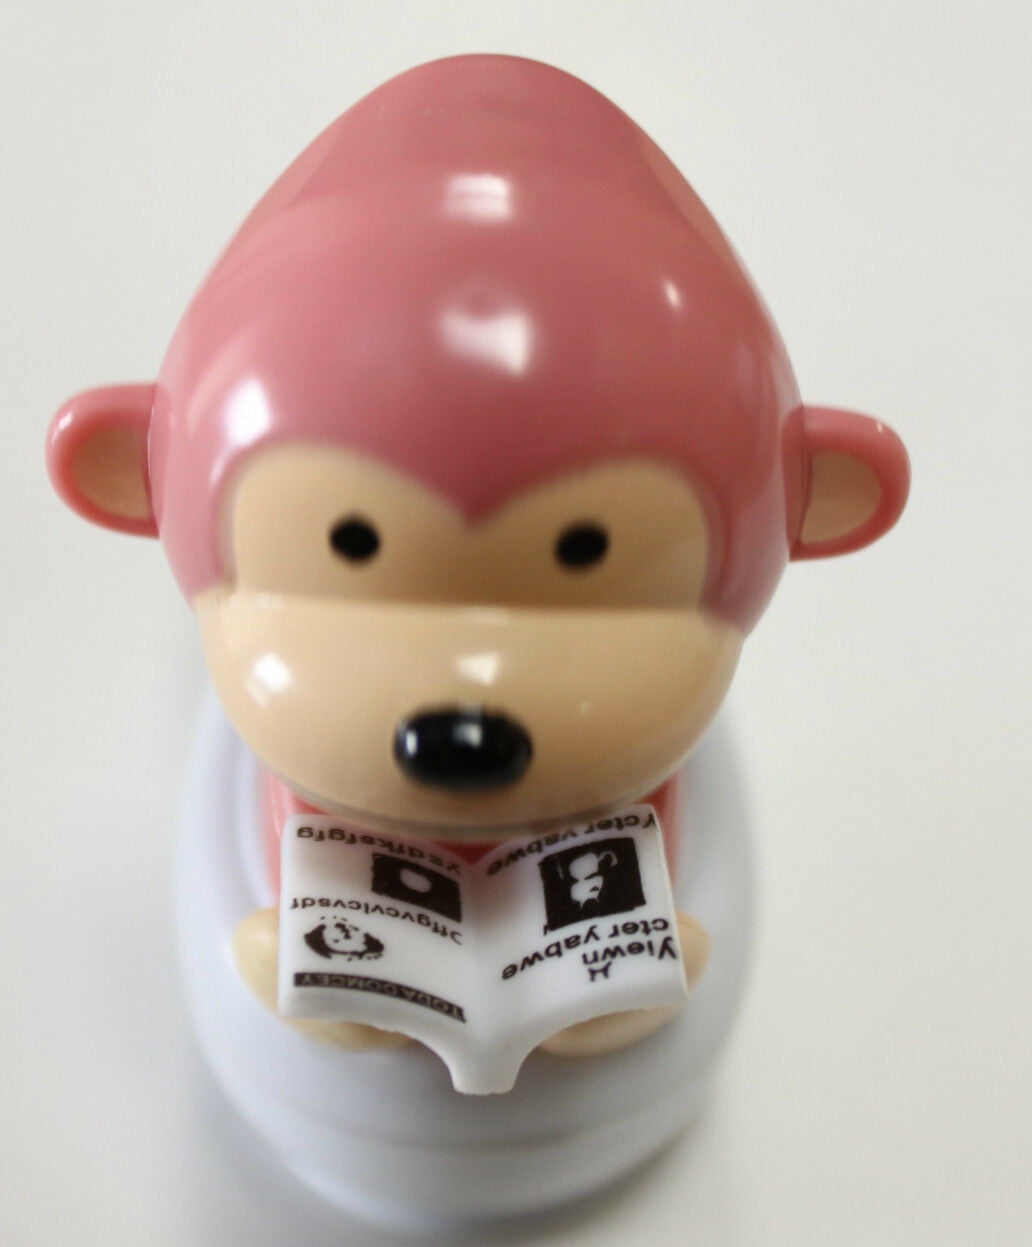 Pack of 4 Monkey Reading on Toilet Bowl Solar Power Desk Toys Mixed Color Decor. 